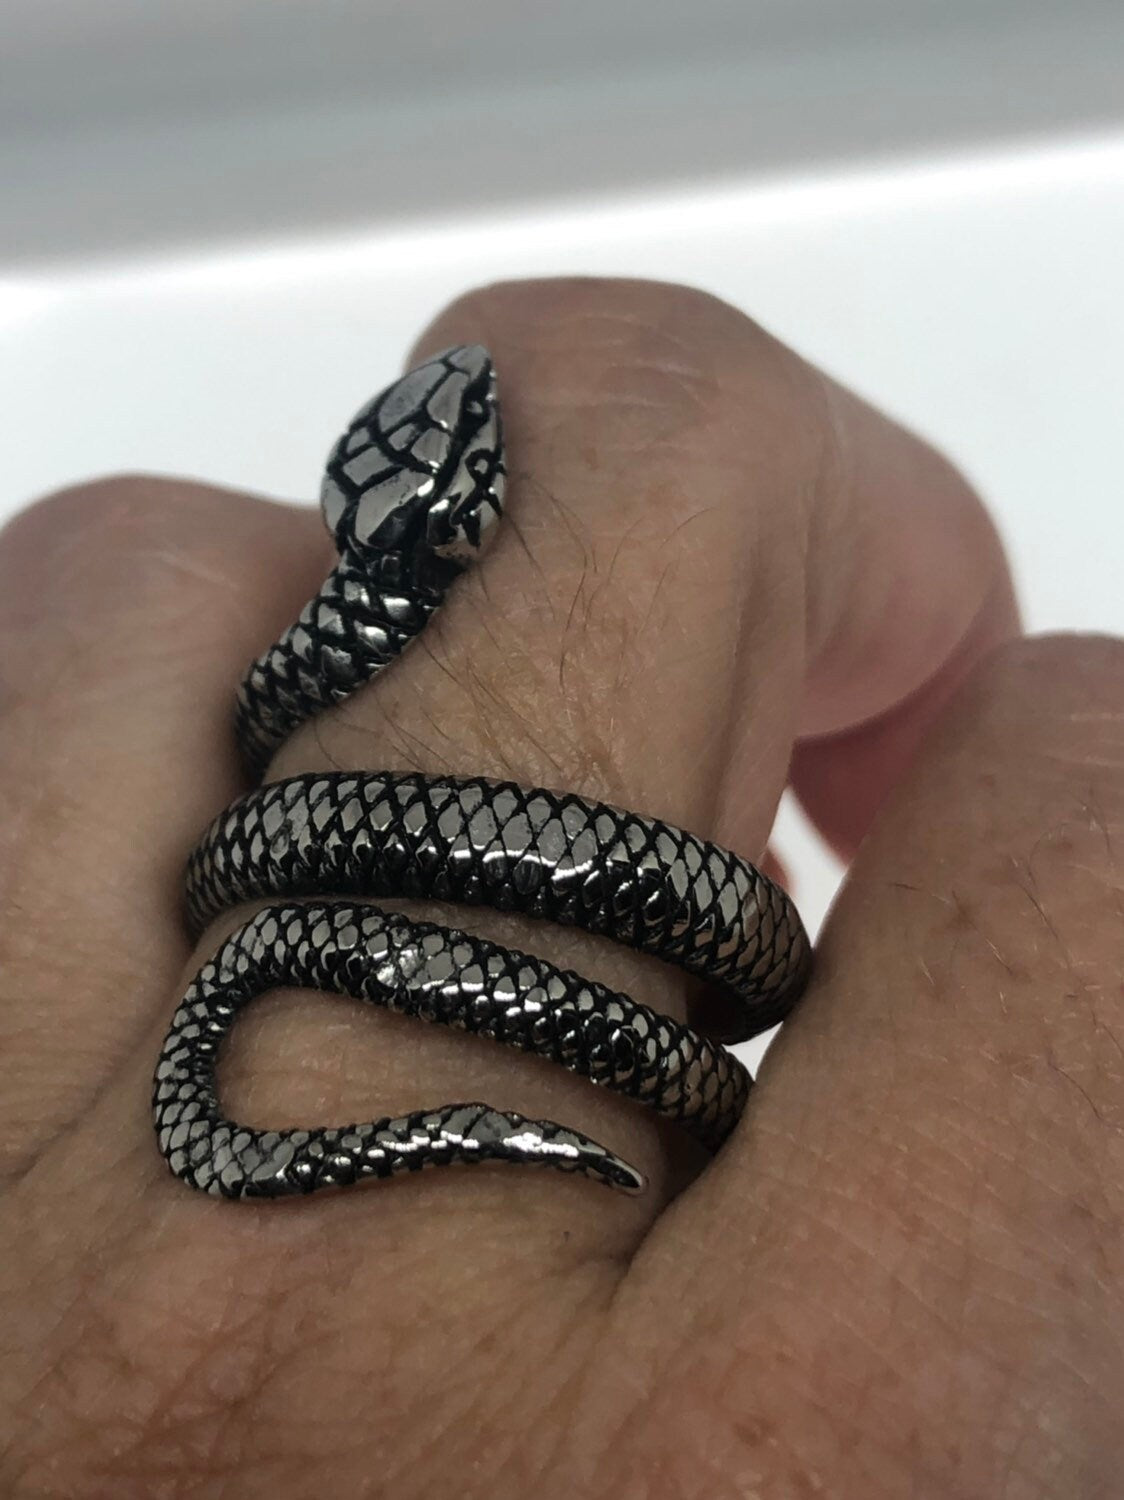 Vintage Gothic Stainless Steel Snake Serpant Mens Ring